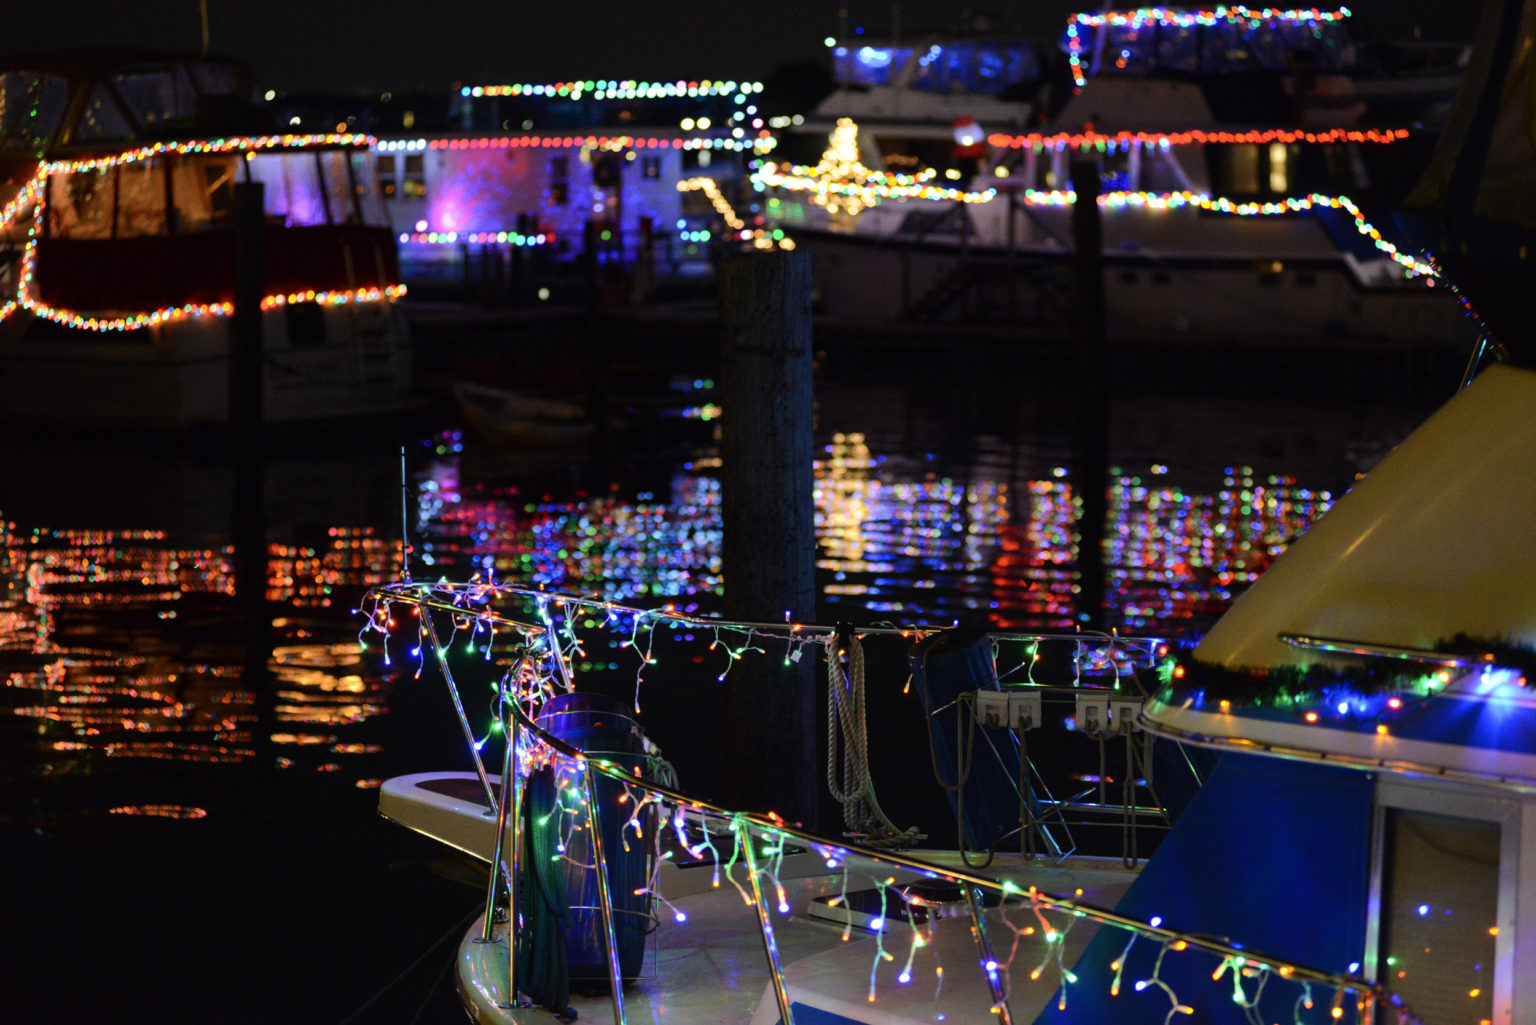 Behind the Scenes of DC's 30th Annual Holiday Boat Parade